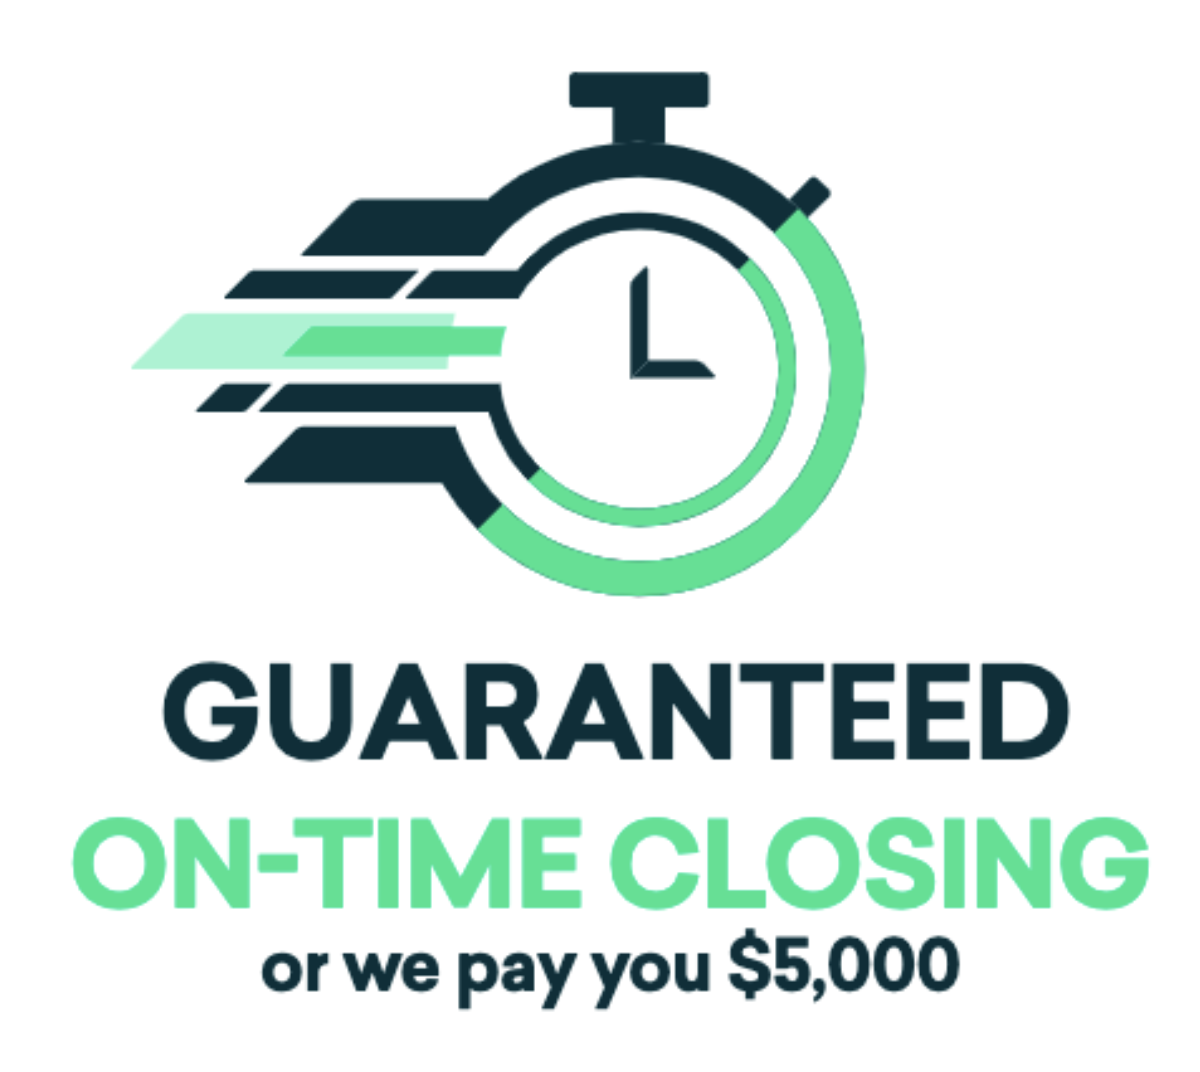 Our promise to you: If you don’t close on time, we’ll pay you $5,000, guaranteed.****